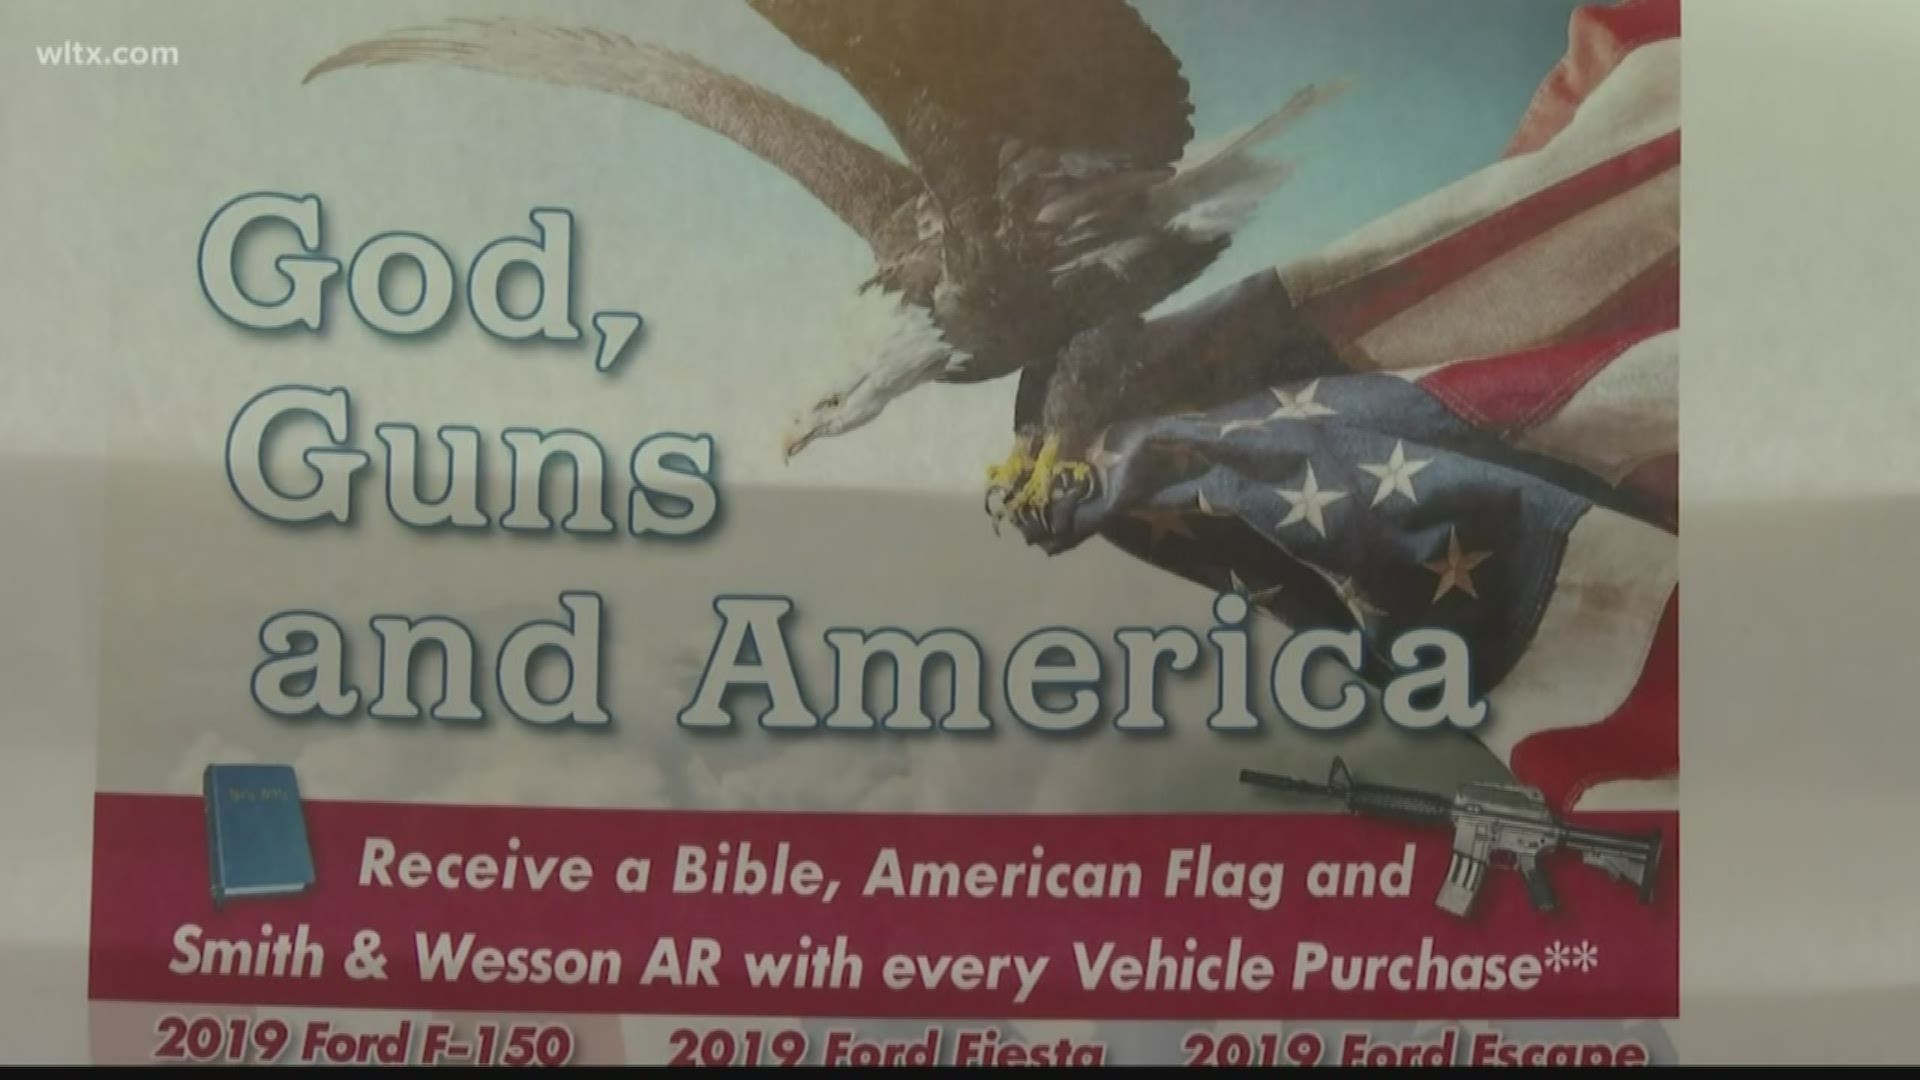 A car dealership in a small South Carolina town will give you a flag, a Bible and a gun if you purchase a vehicle.